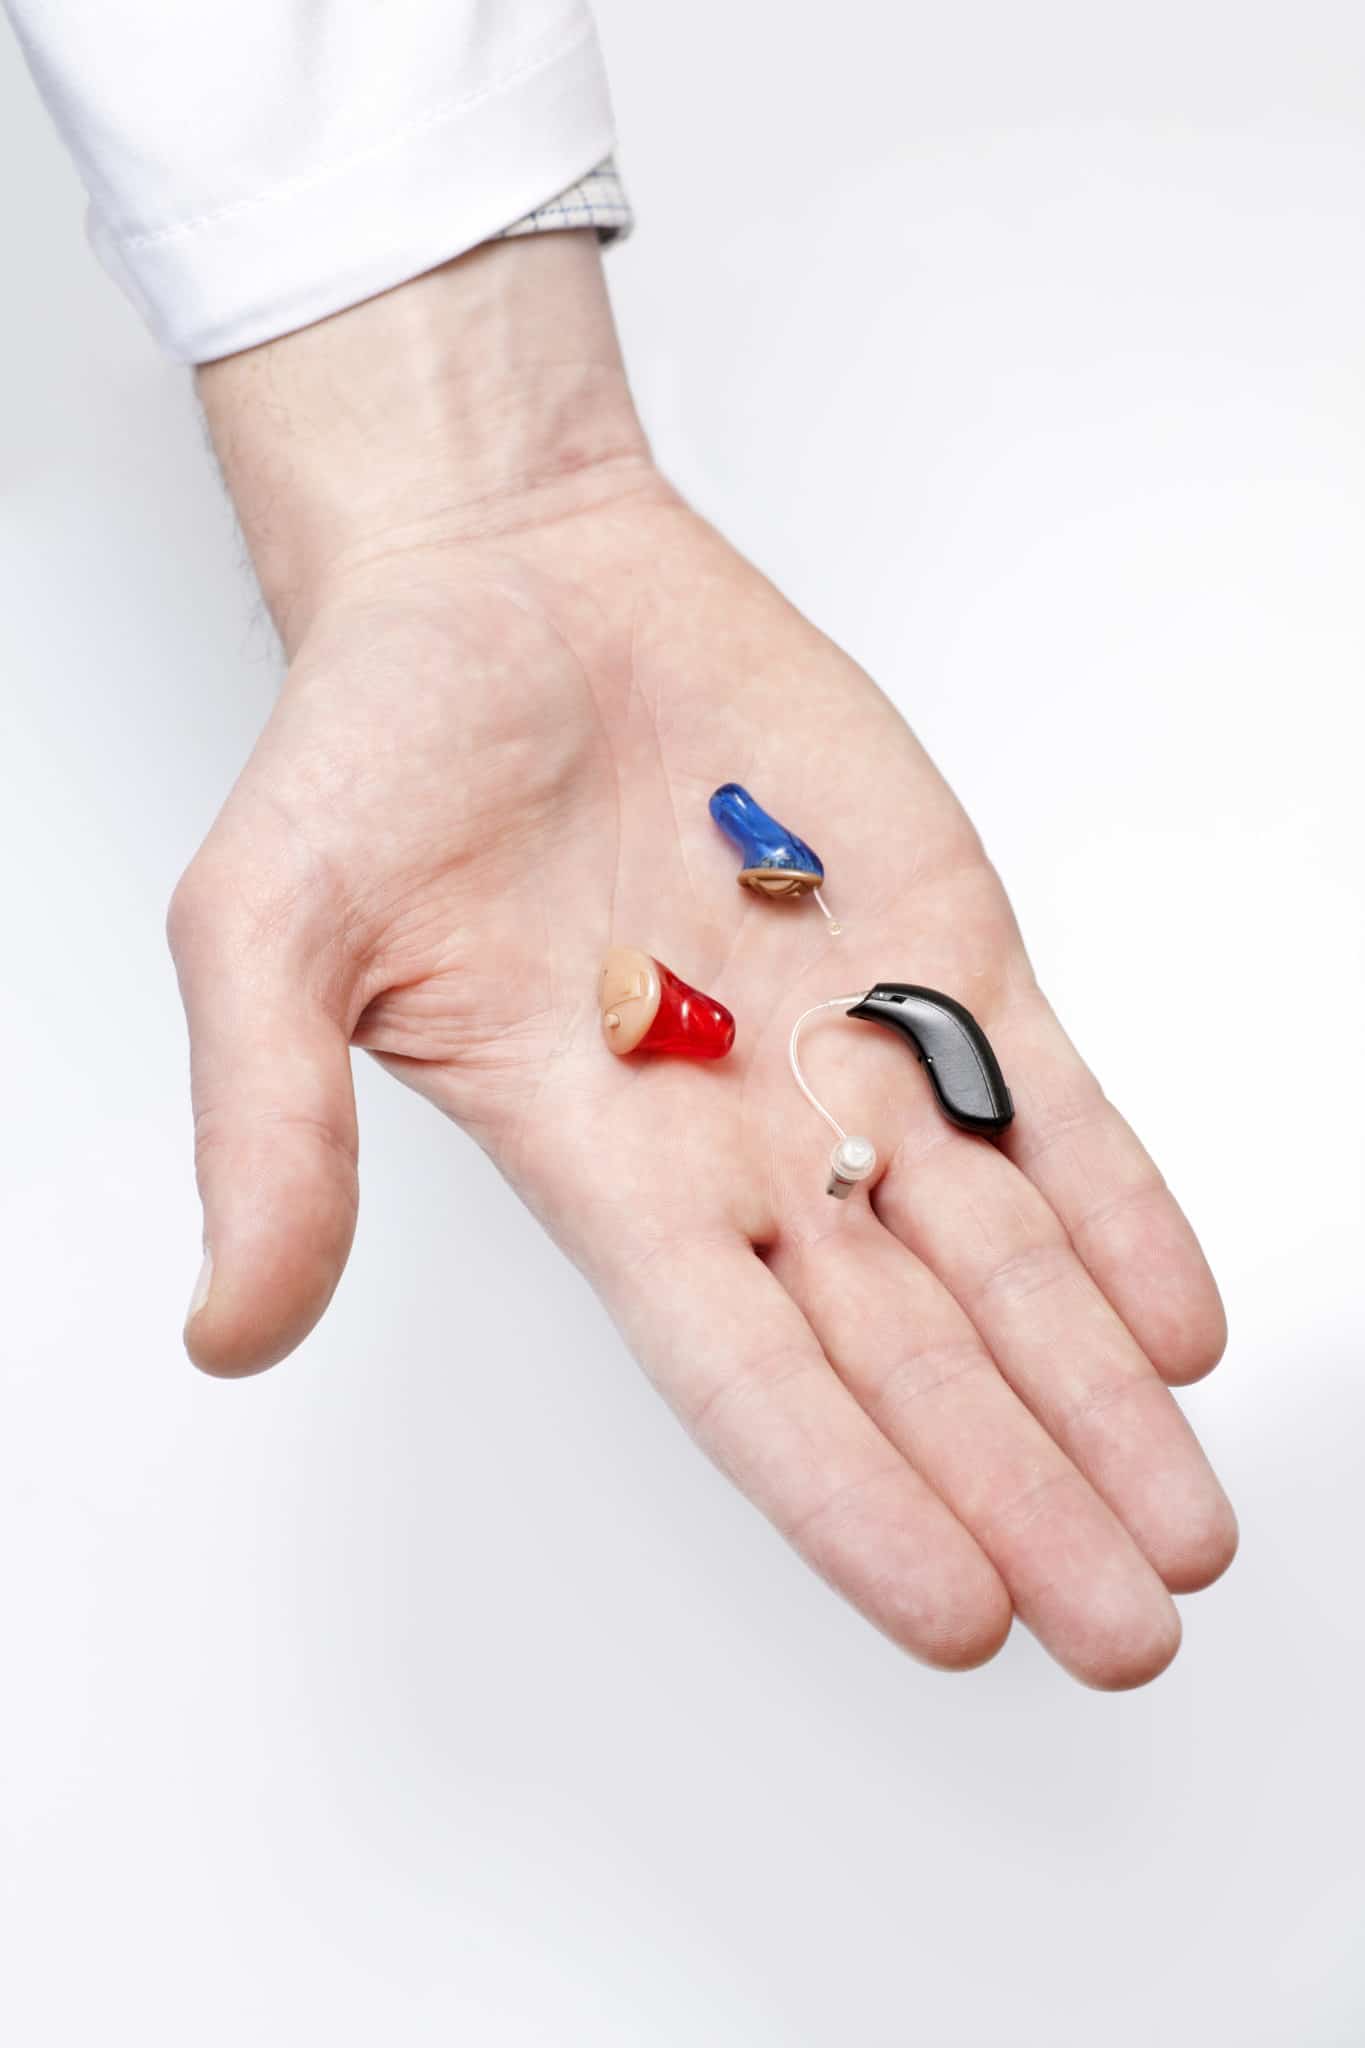 A hearing instrument specialist in Pennsylvania holding multiple hearing aids and hearing devices in their hand.